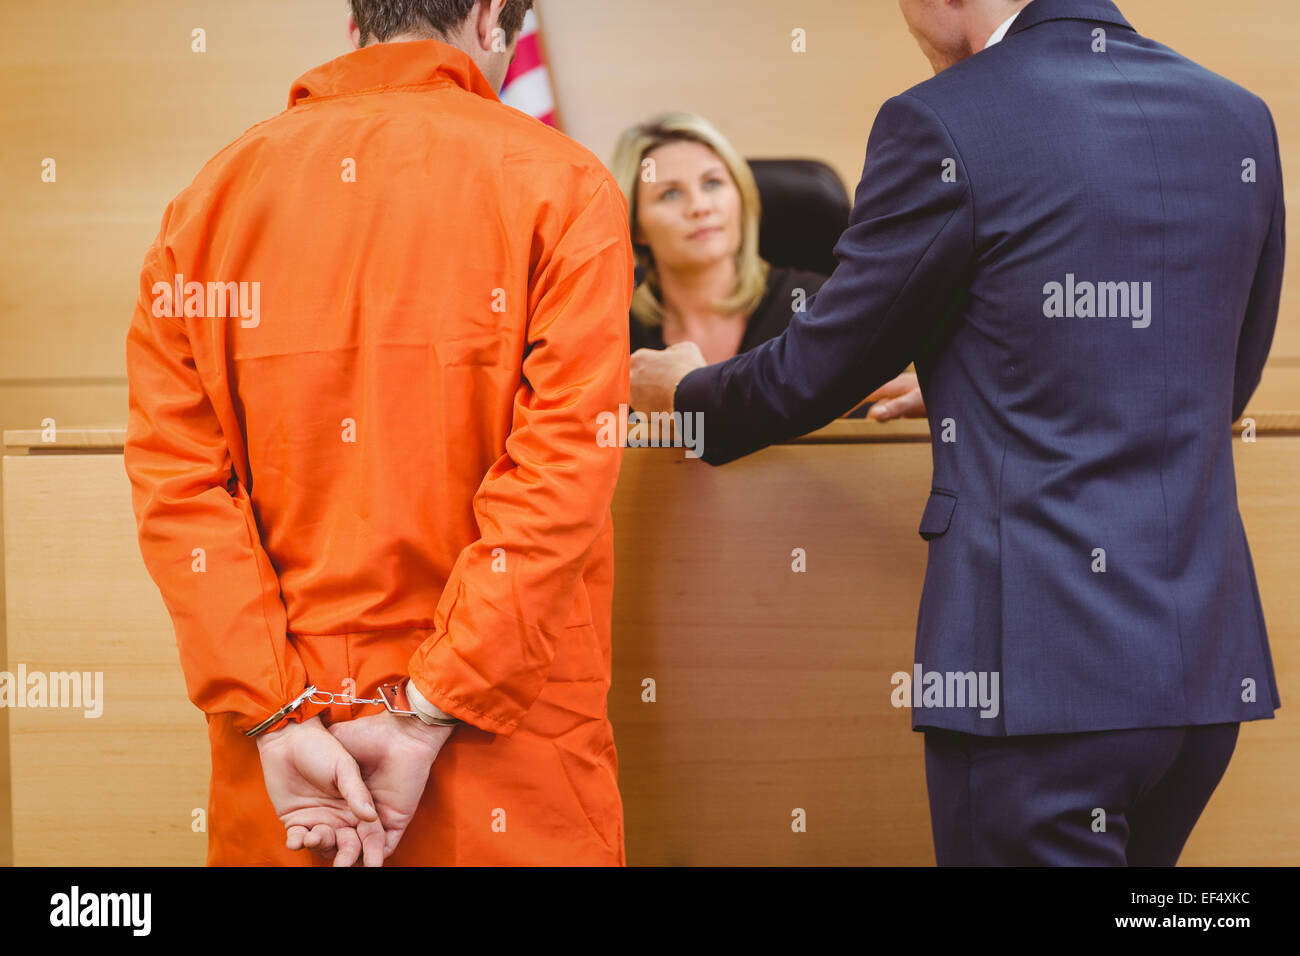 Lawyer and judge speaking next to the criminal in handcuffs Stock Photo